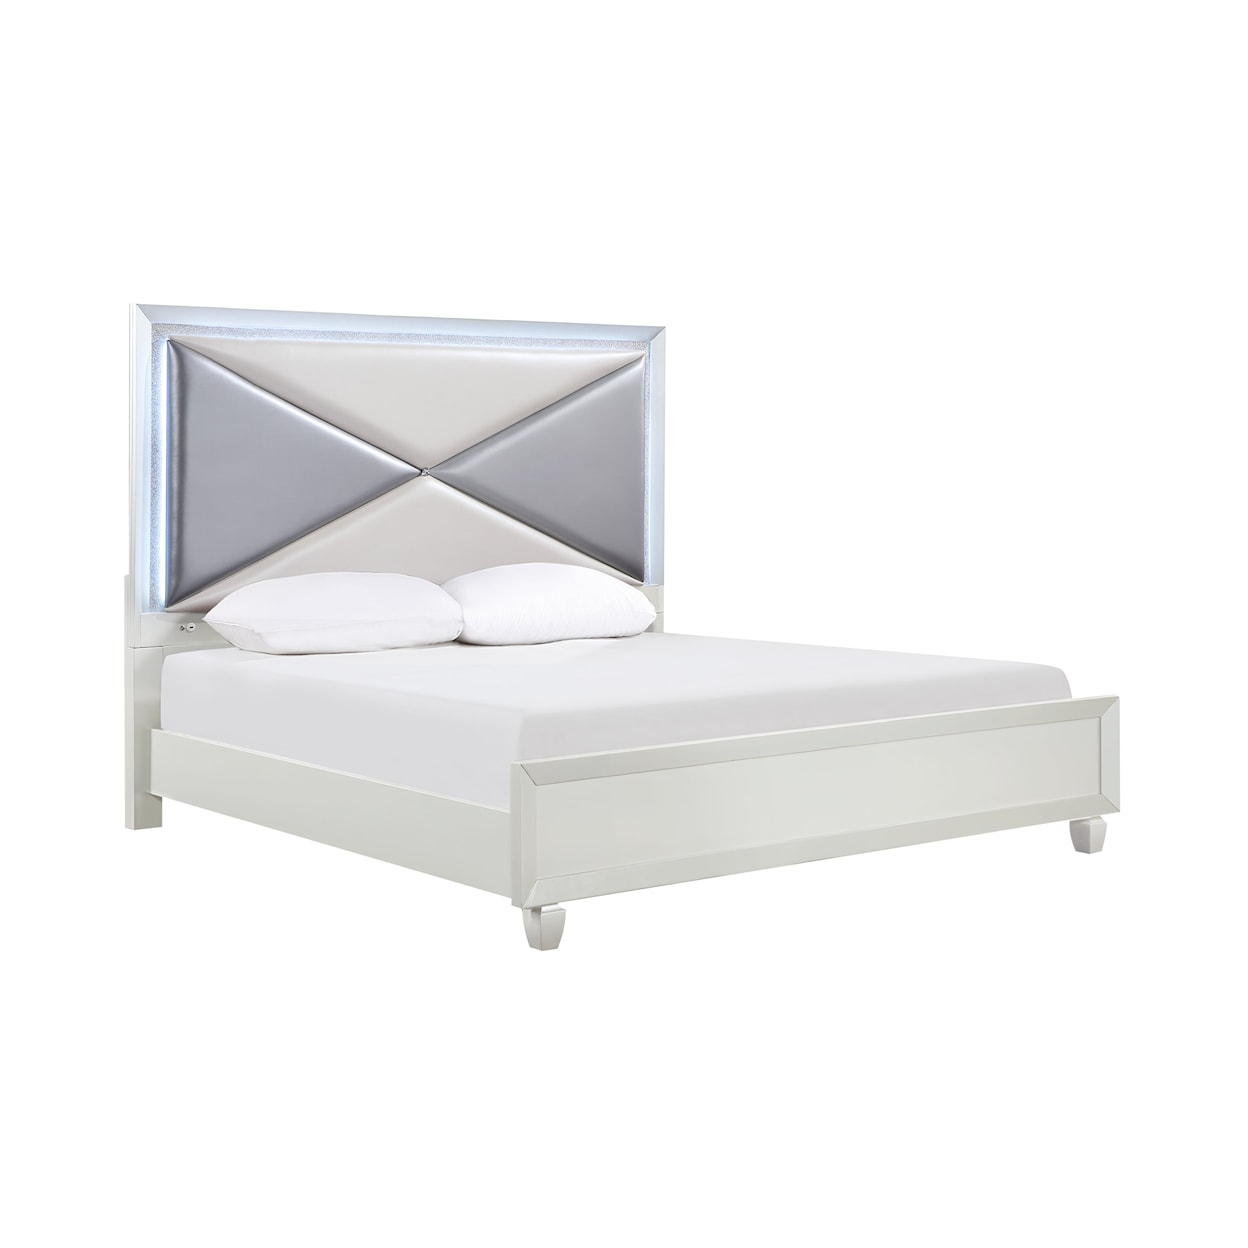 New Classic Harlequin California King Bed